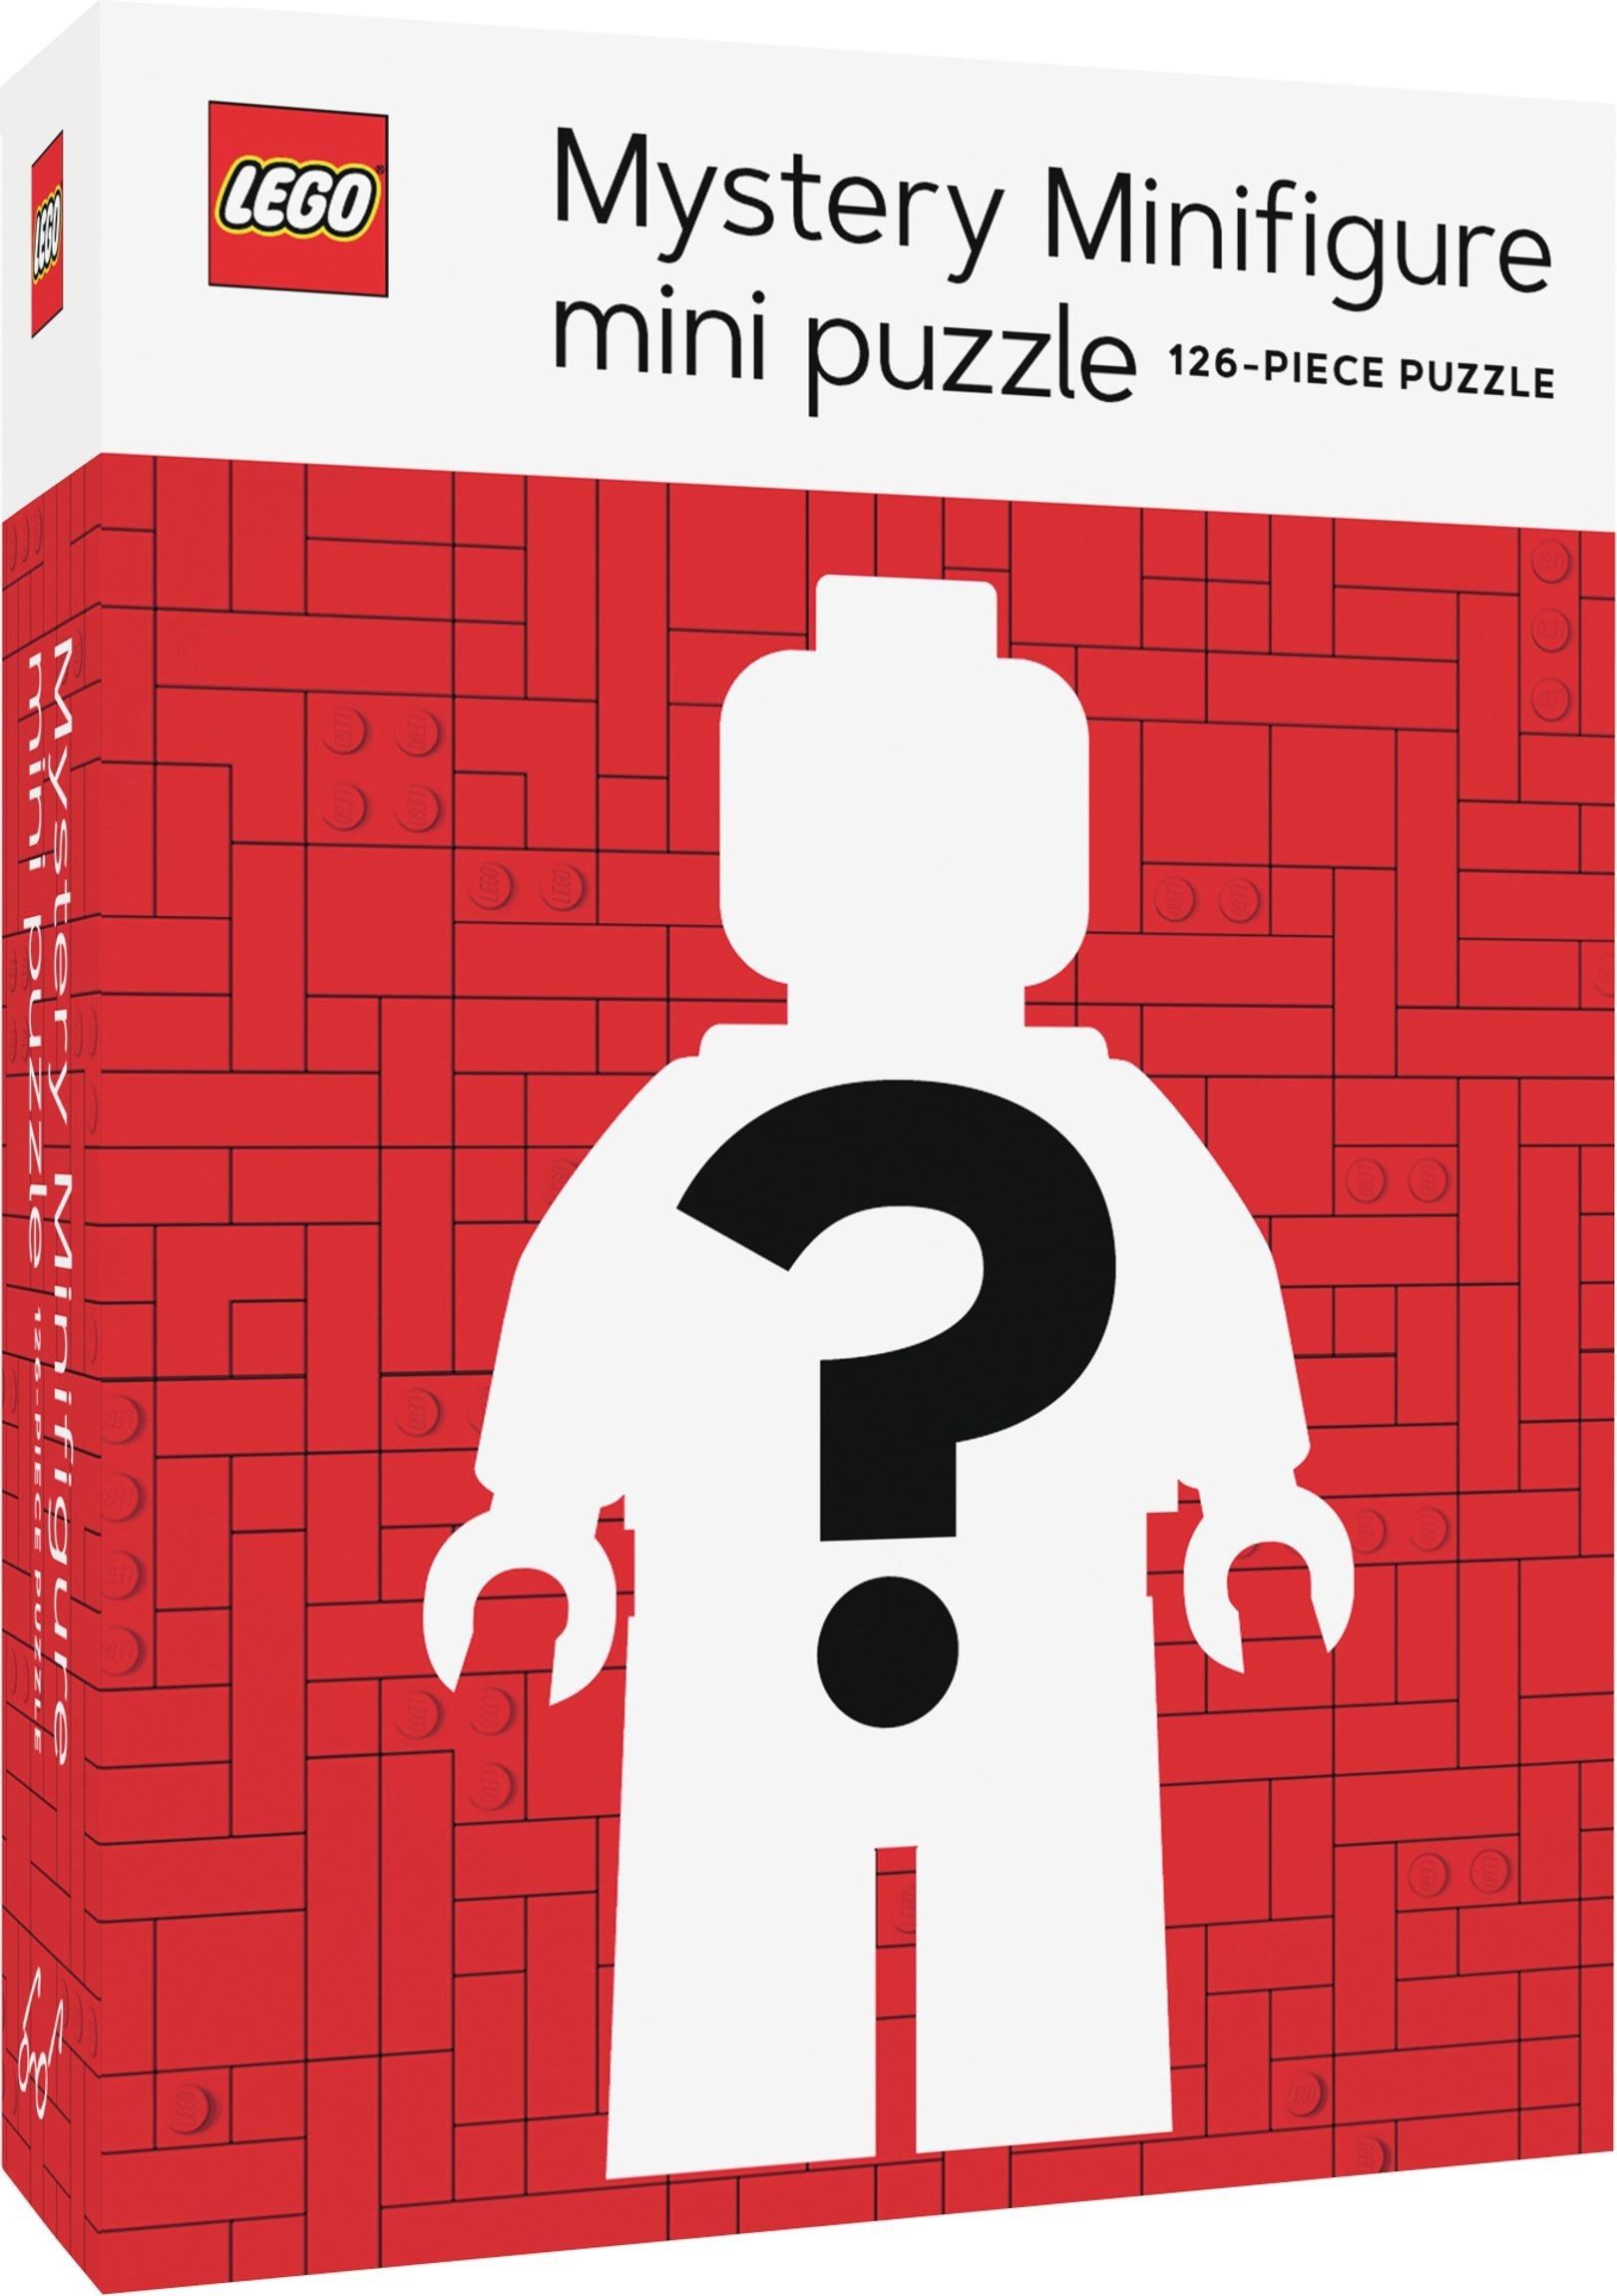 Mystery Minifigure Mini Puzzle (Red Edition)